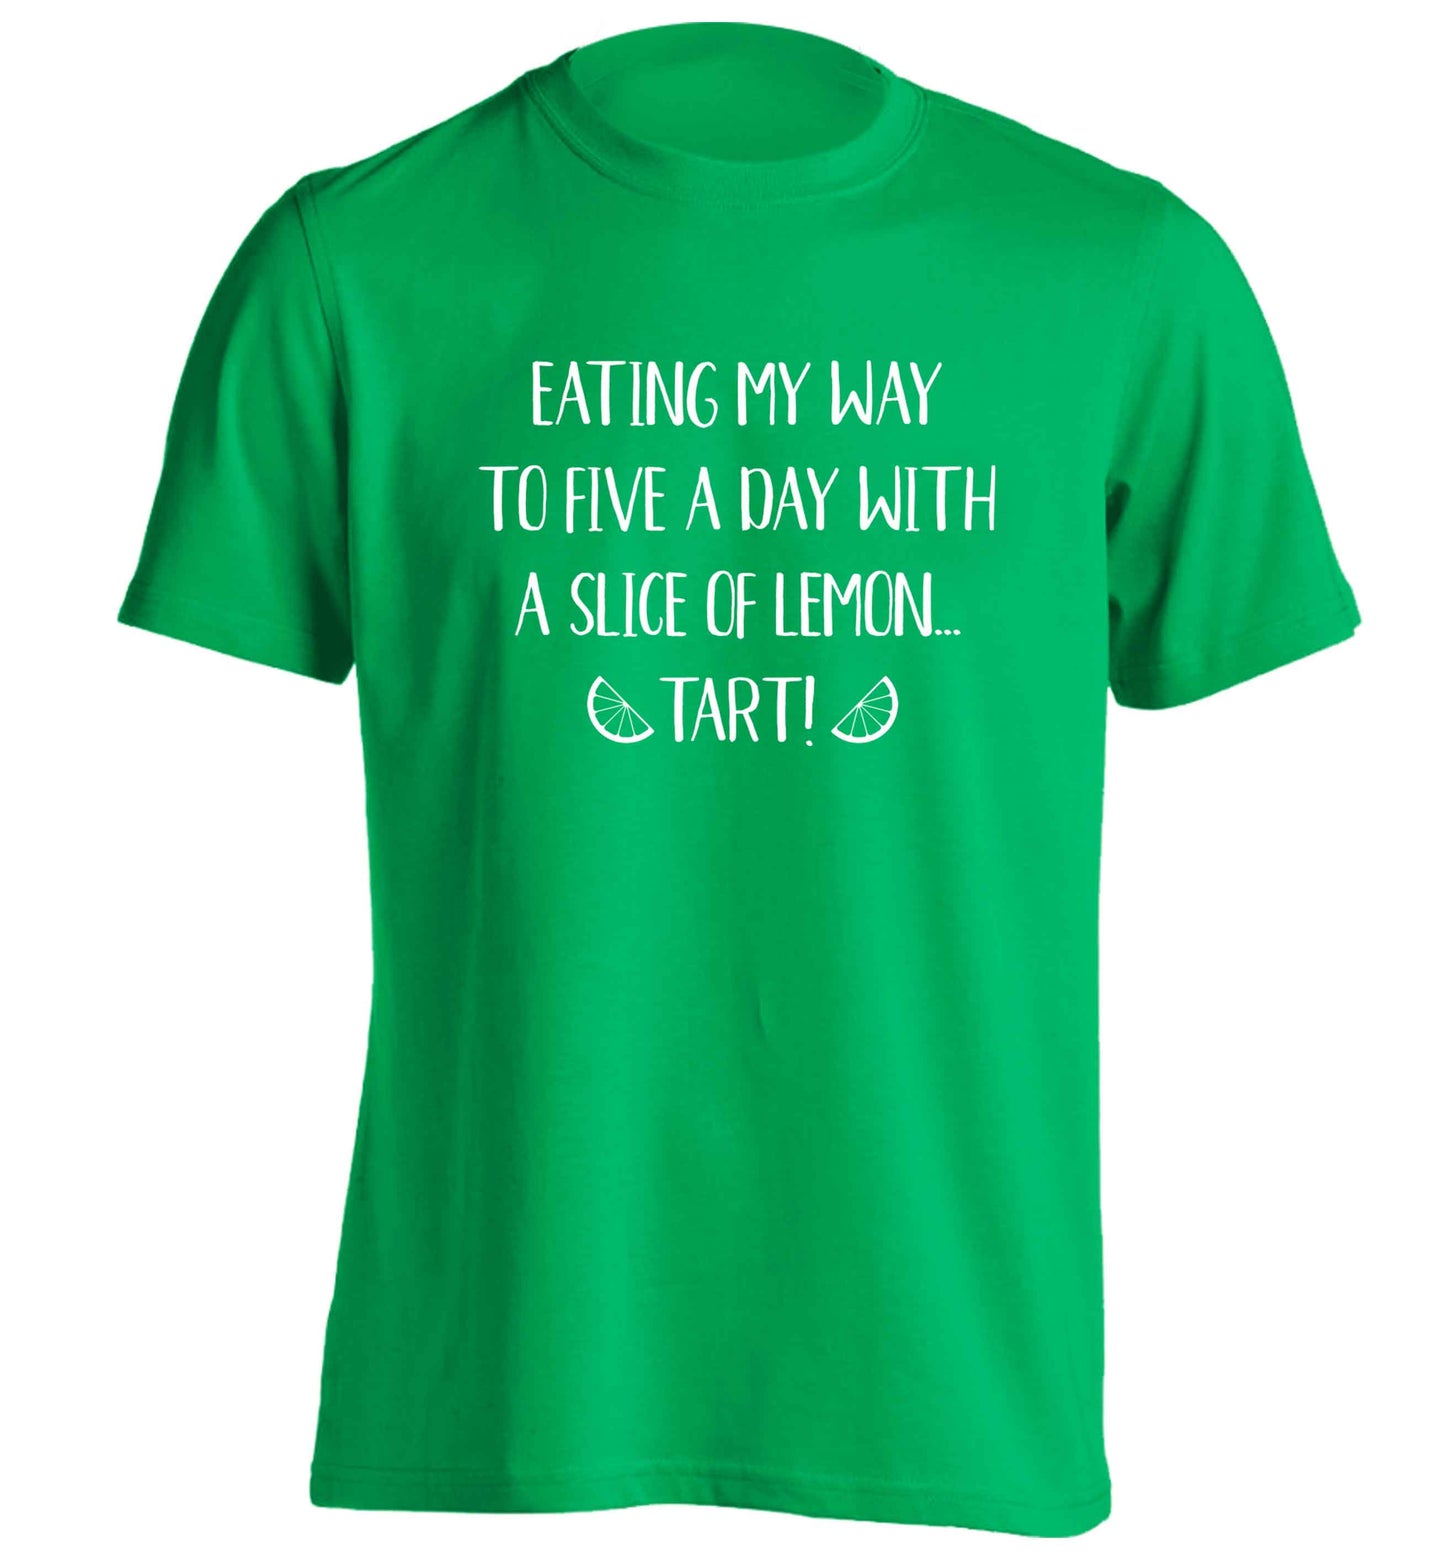 Eating my way to five a day with a slice of lemon tart adults unisex green Tshirt 2XL